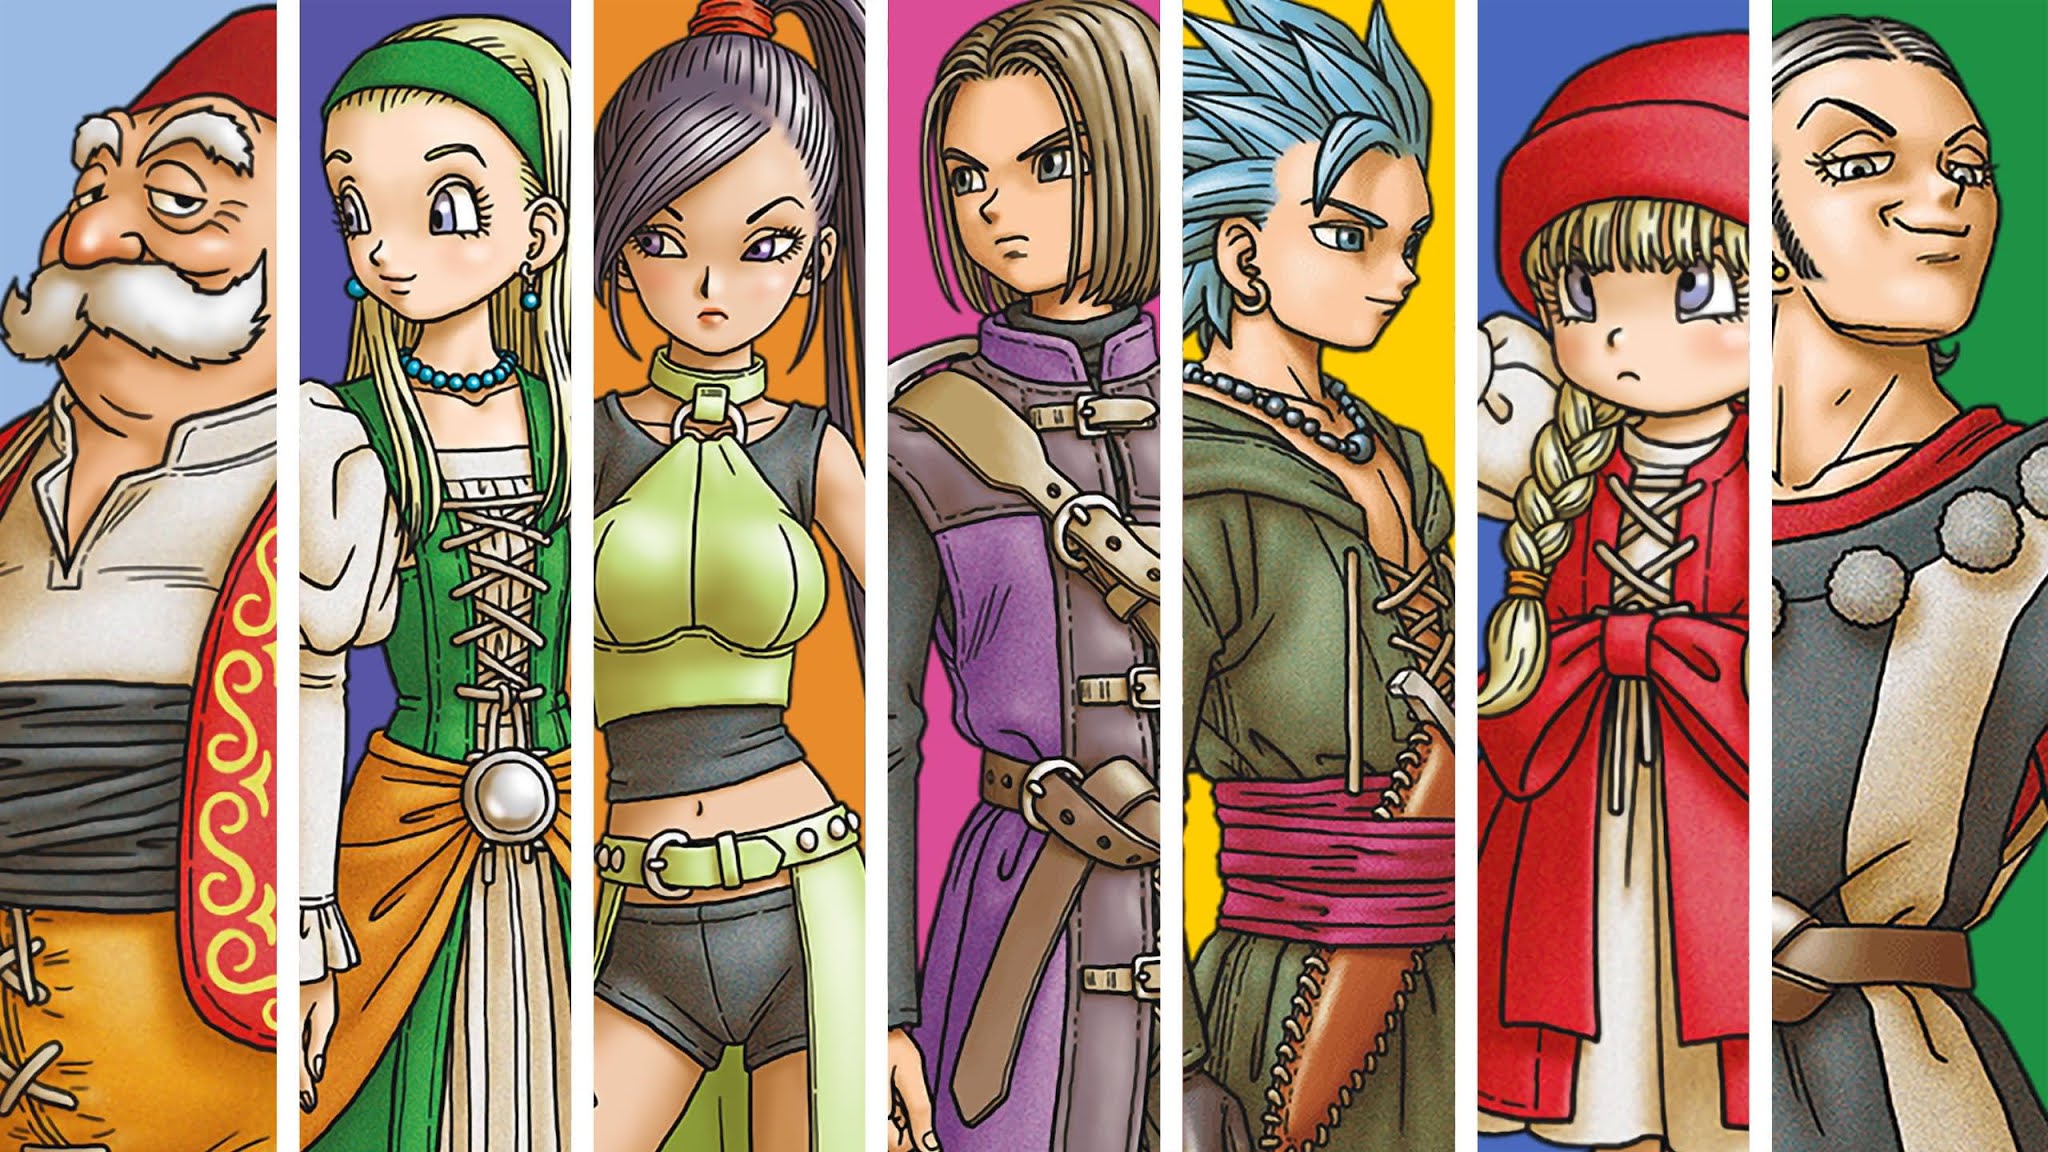 Dragon Quest XI S: Echoes of an Elusive Age - Definitive Edition - Swi -  ShopB - 14 anos!